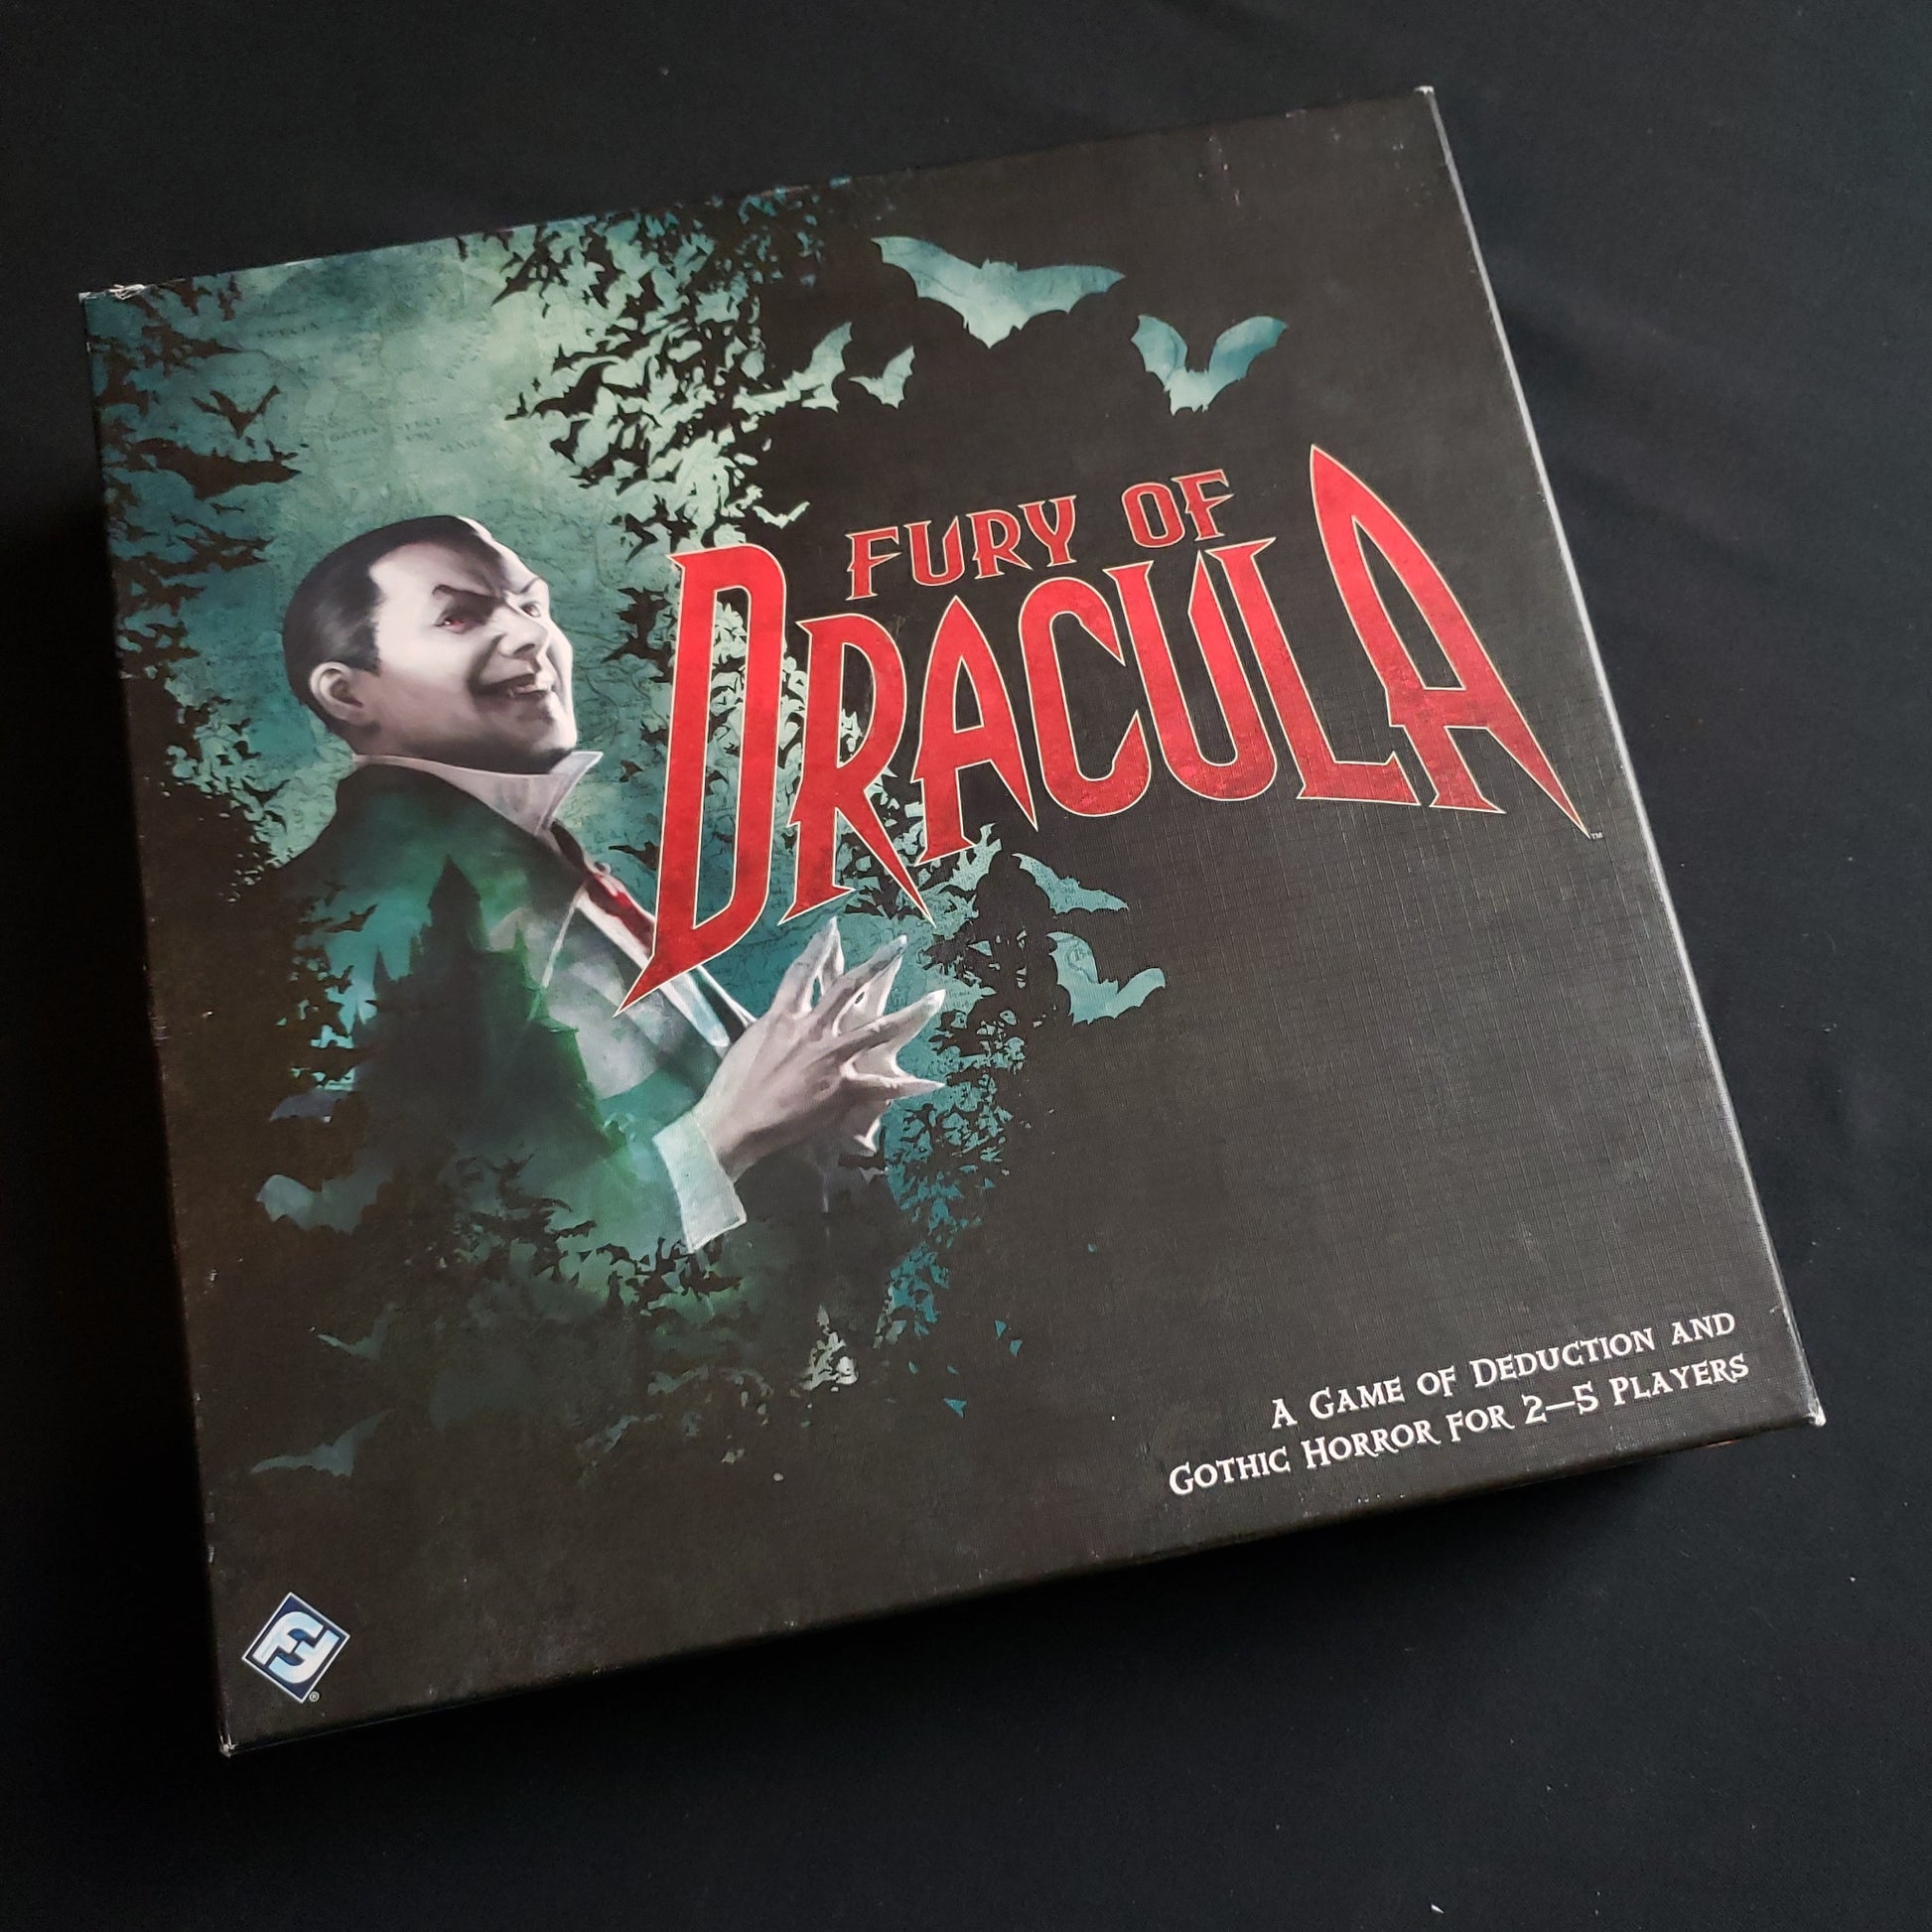 Image shows the front cover of the box of the Fury of Dracula board game